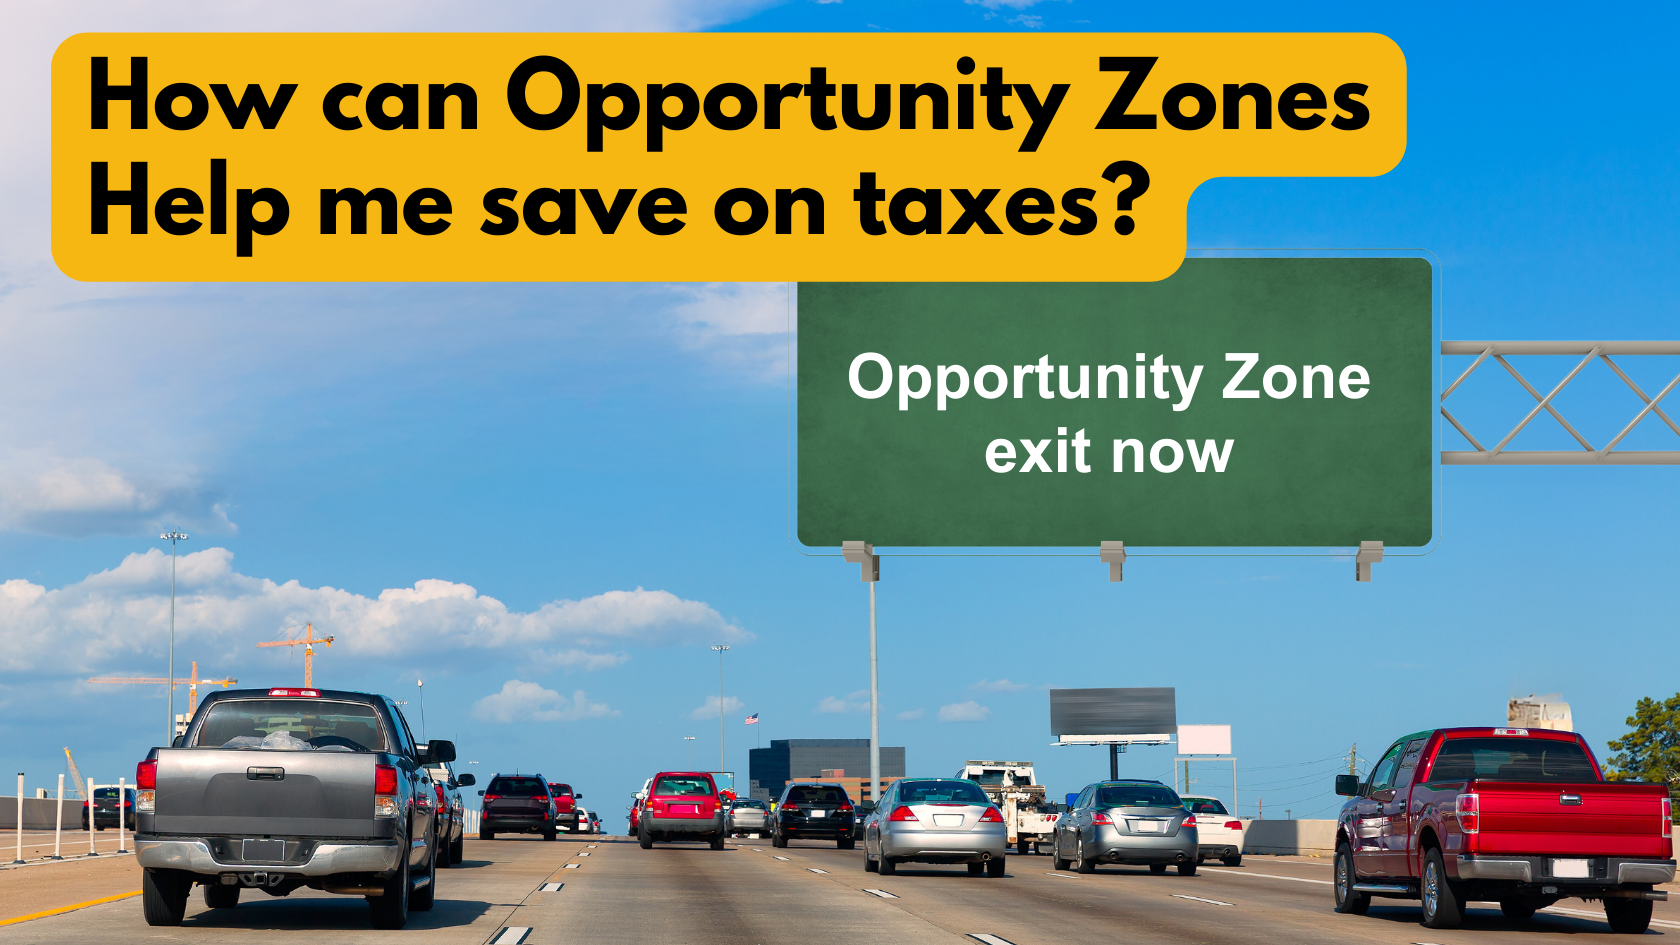 How can opportunity zones help me save money on taxes?